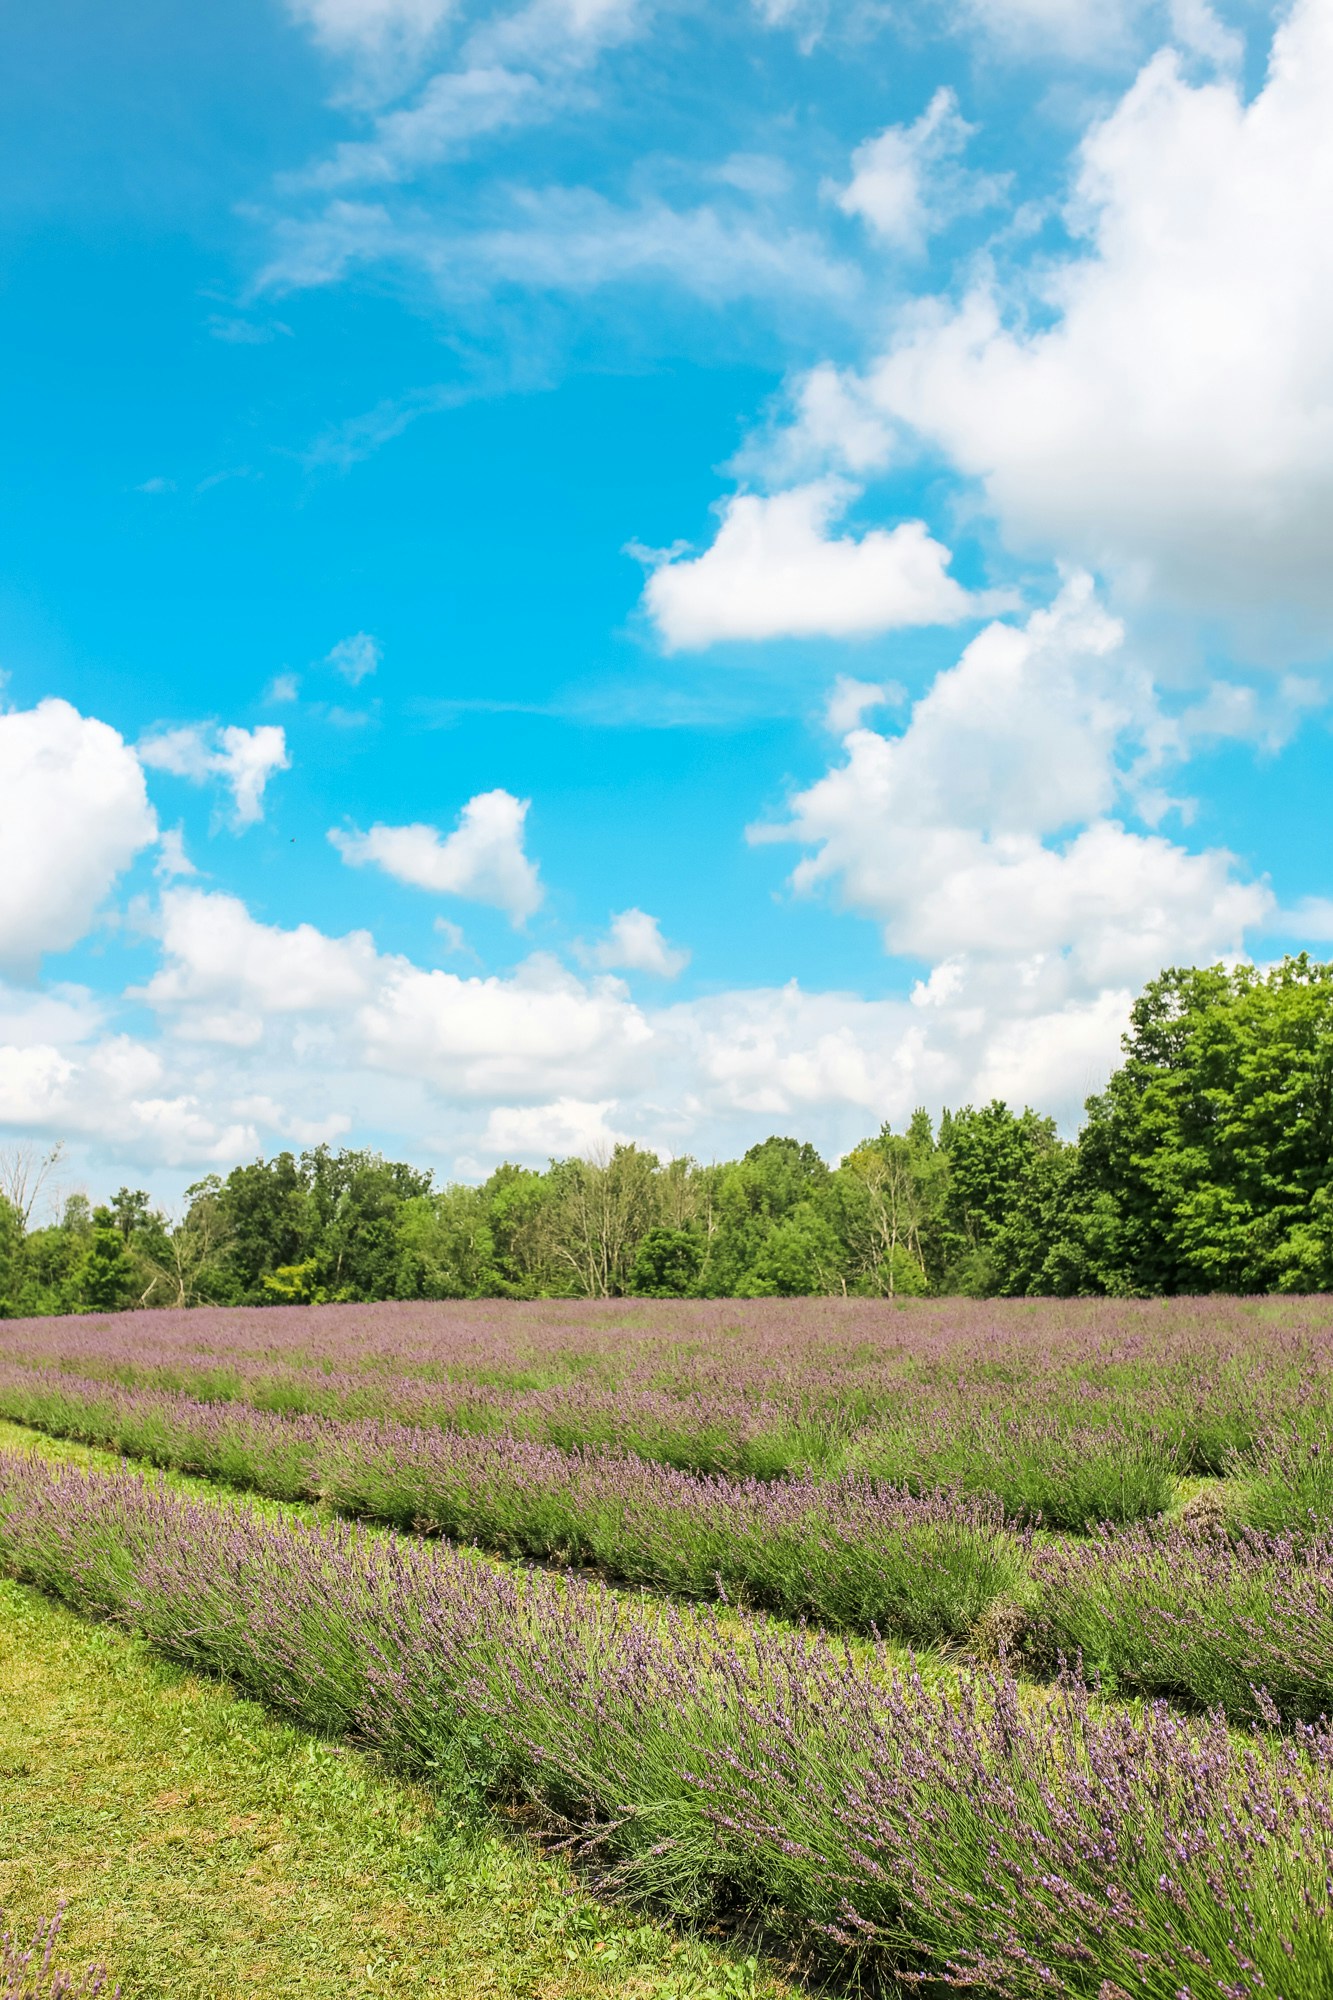 Terre Bleu lavender farm is a gorgeous lavender field located in Guelph, Ontario, a mere 1 hour drive from Toronto.